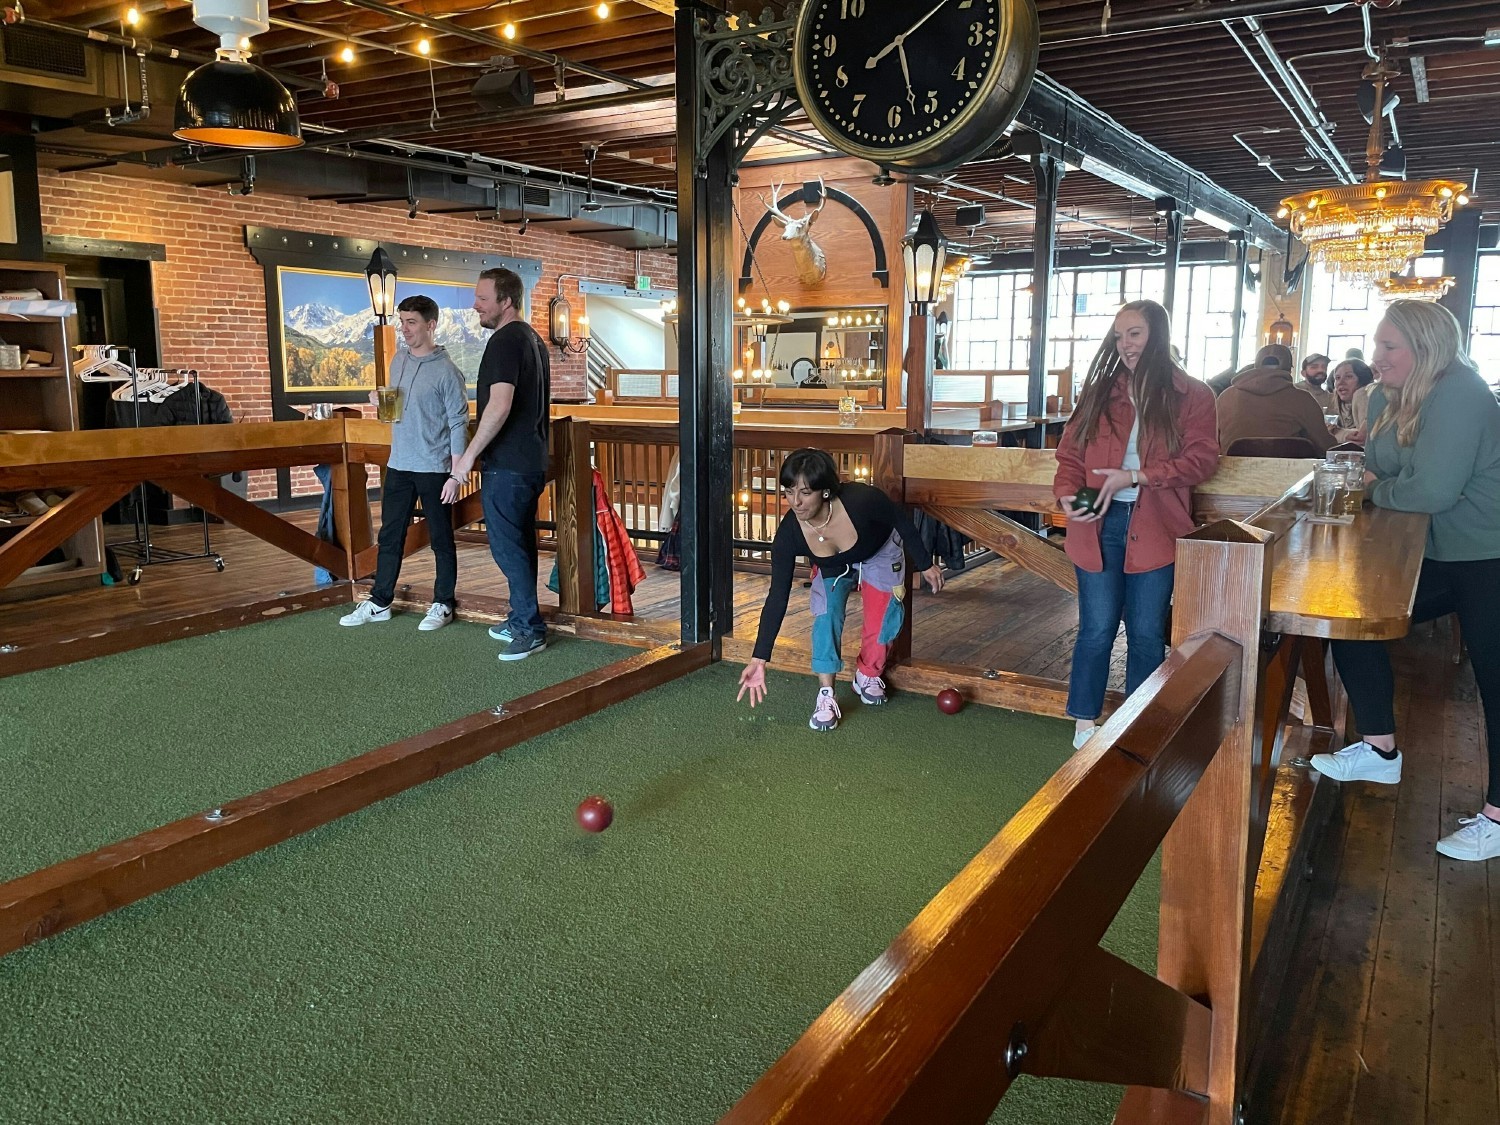 A fun-filled, bocce ball team outing in Denver